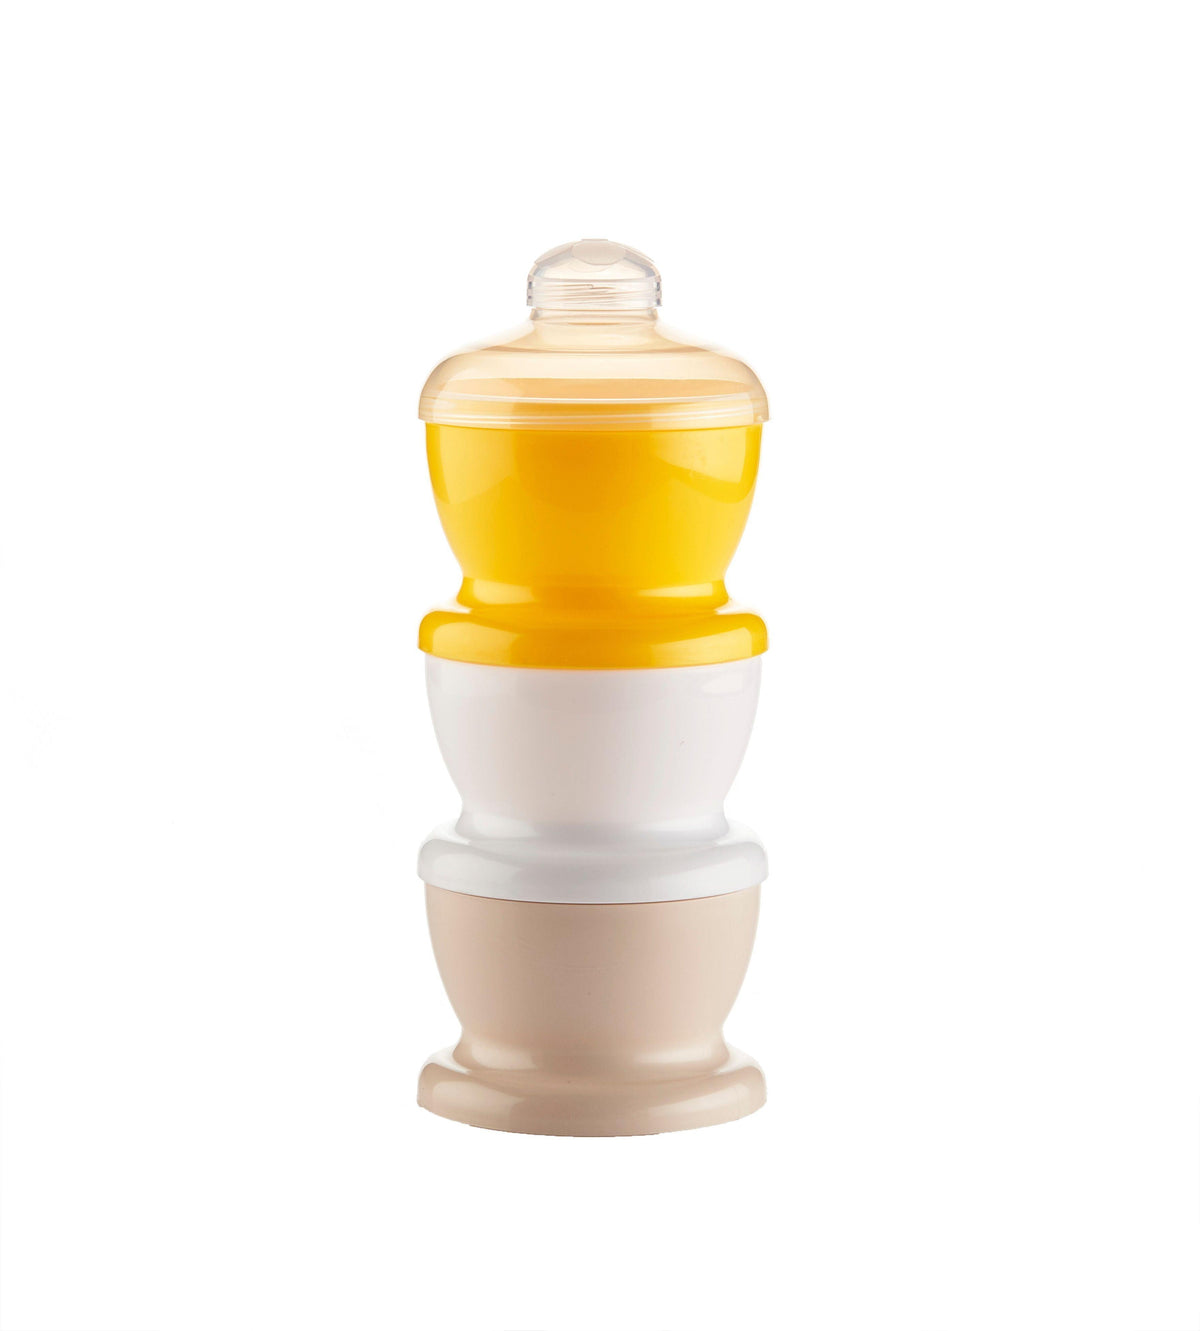 Thermobaby - Baby Milk Formula Container - Mari Kali Stores Cyprus